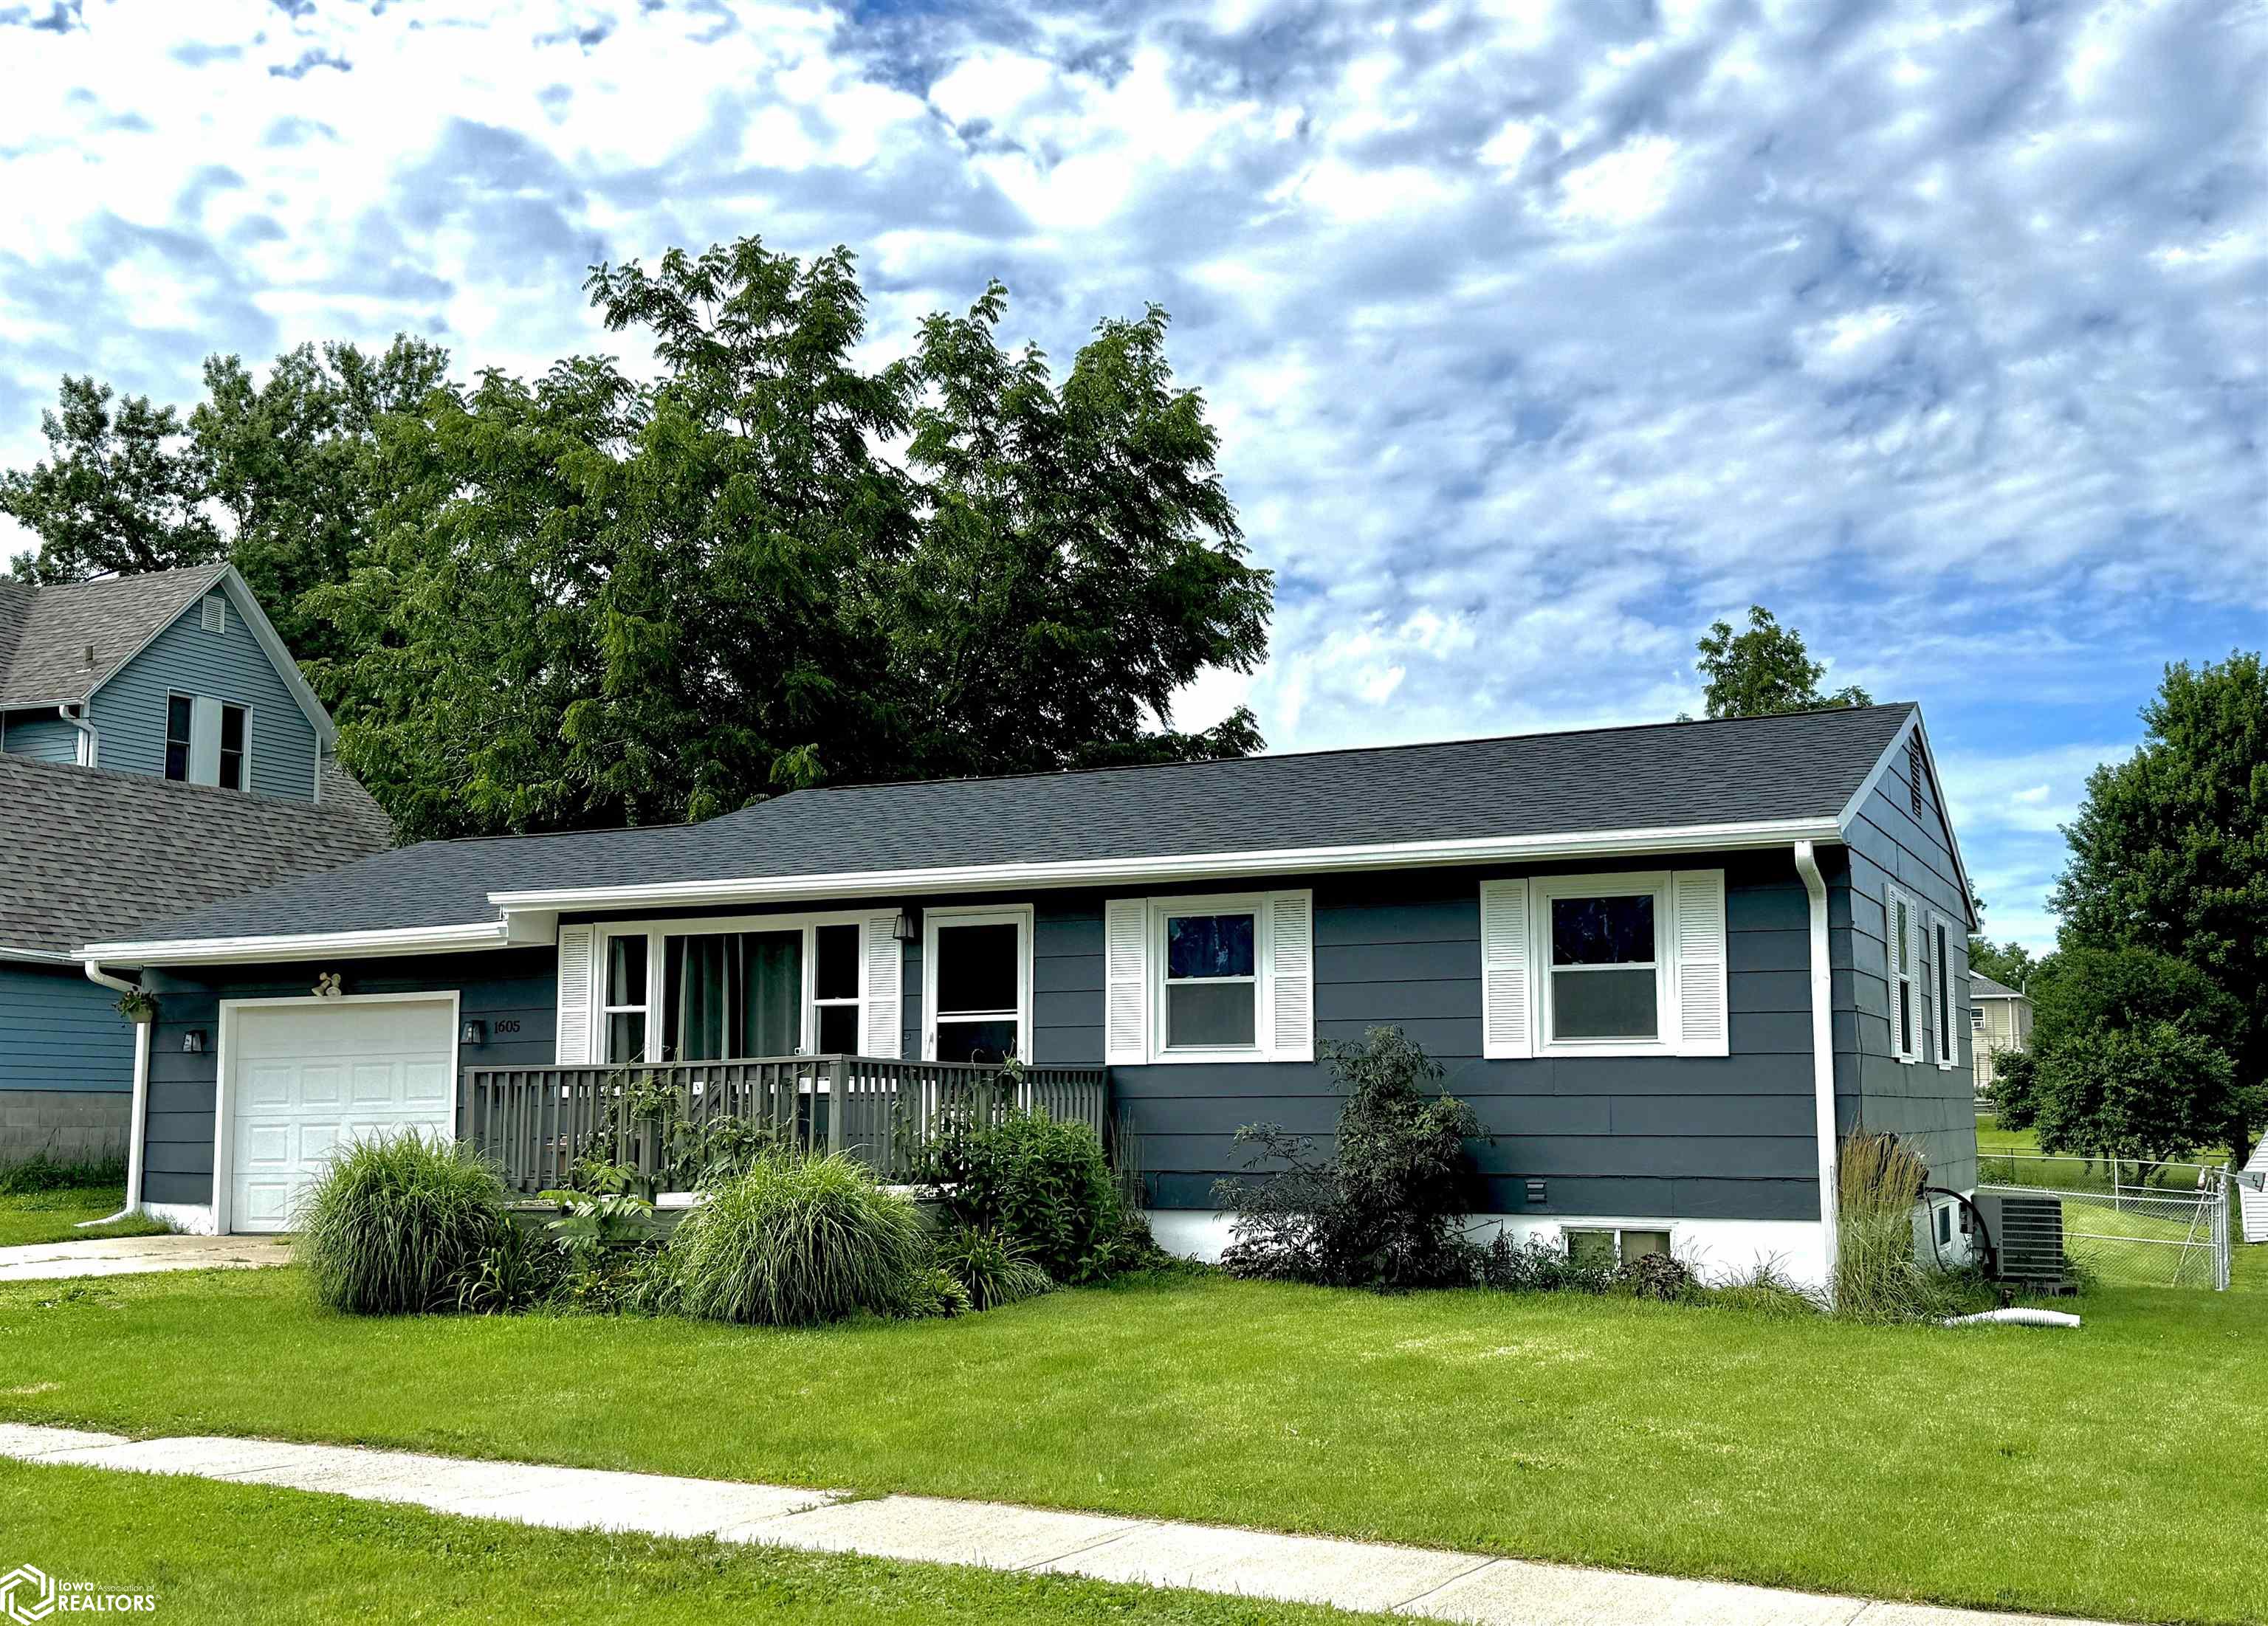 1605 4th, Grinnell, Iowa 50112, 3 Bedrooms Bedrooms, ,1 BathroomBathrooms,Single Family,For Sale,4th,6319003